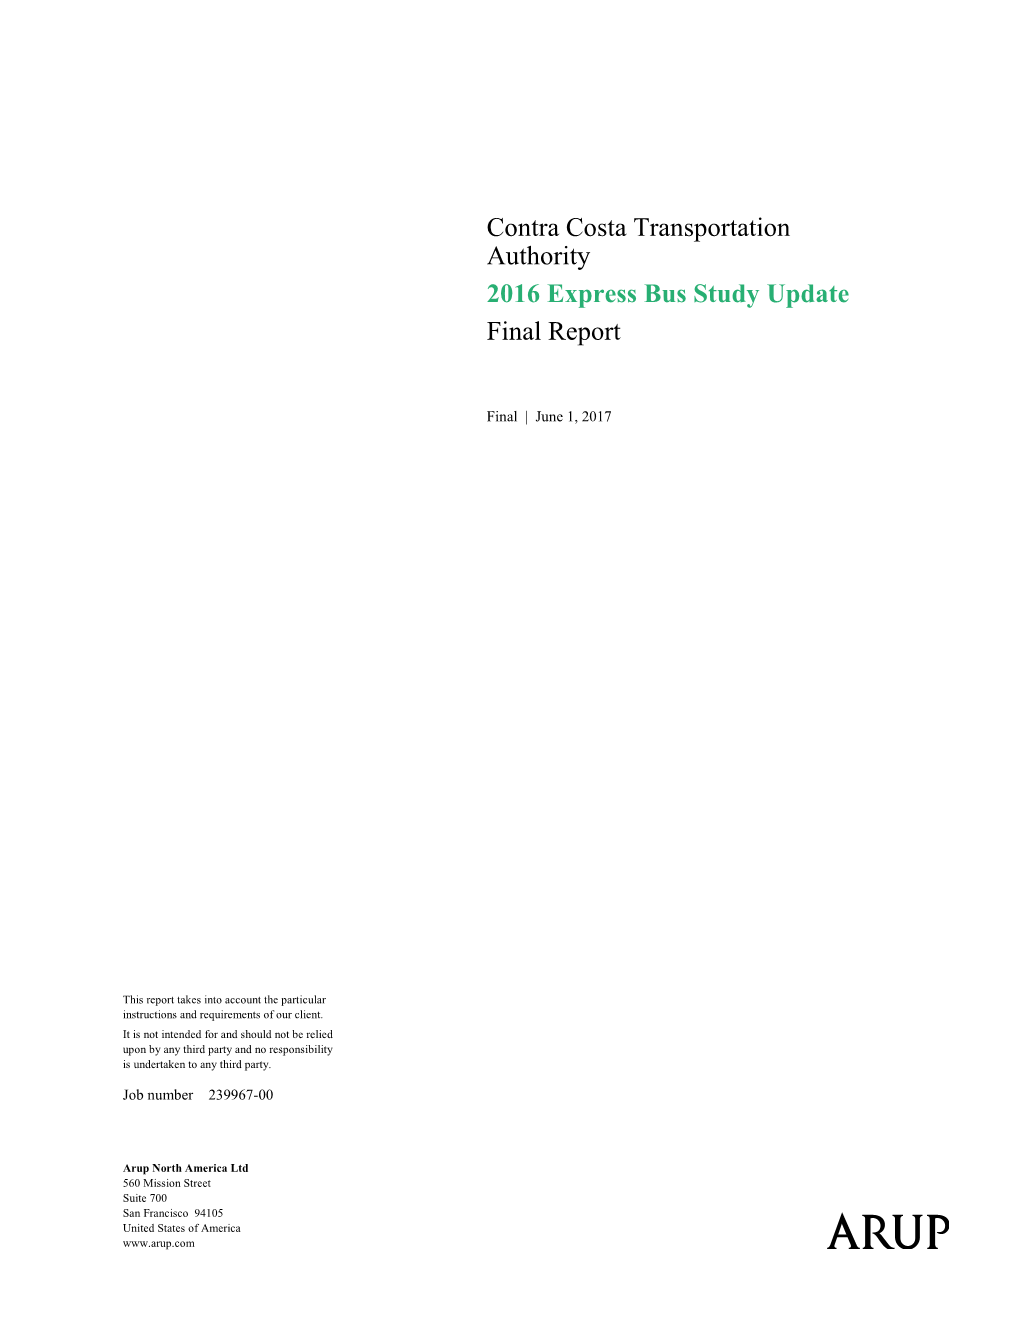 Contra Costa Transportation Authority 2016 Express Bus Study Update Final Report